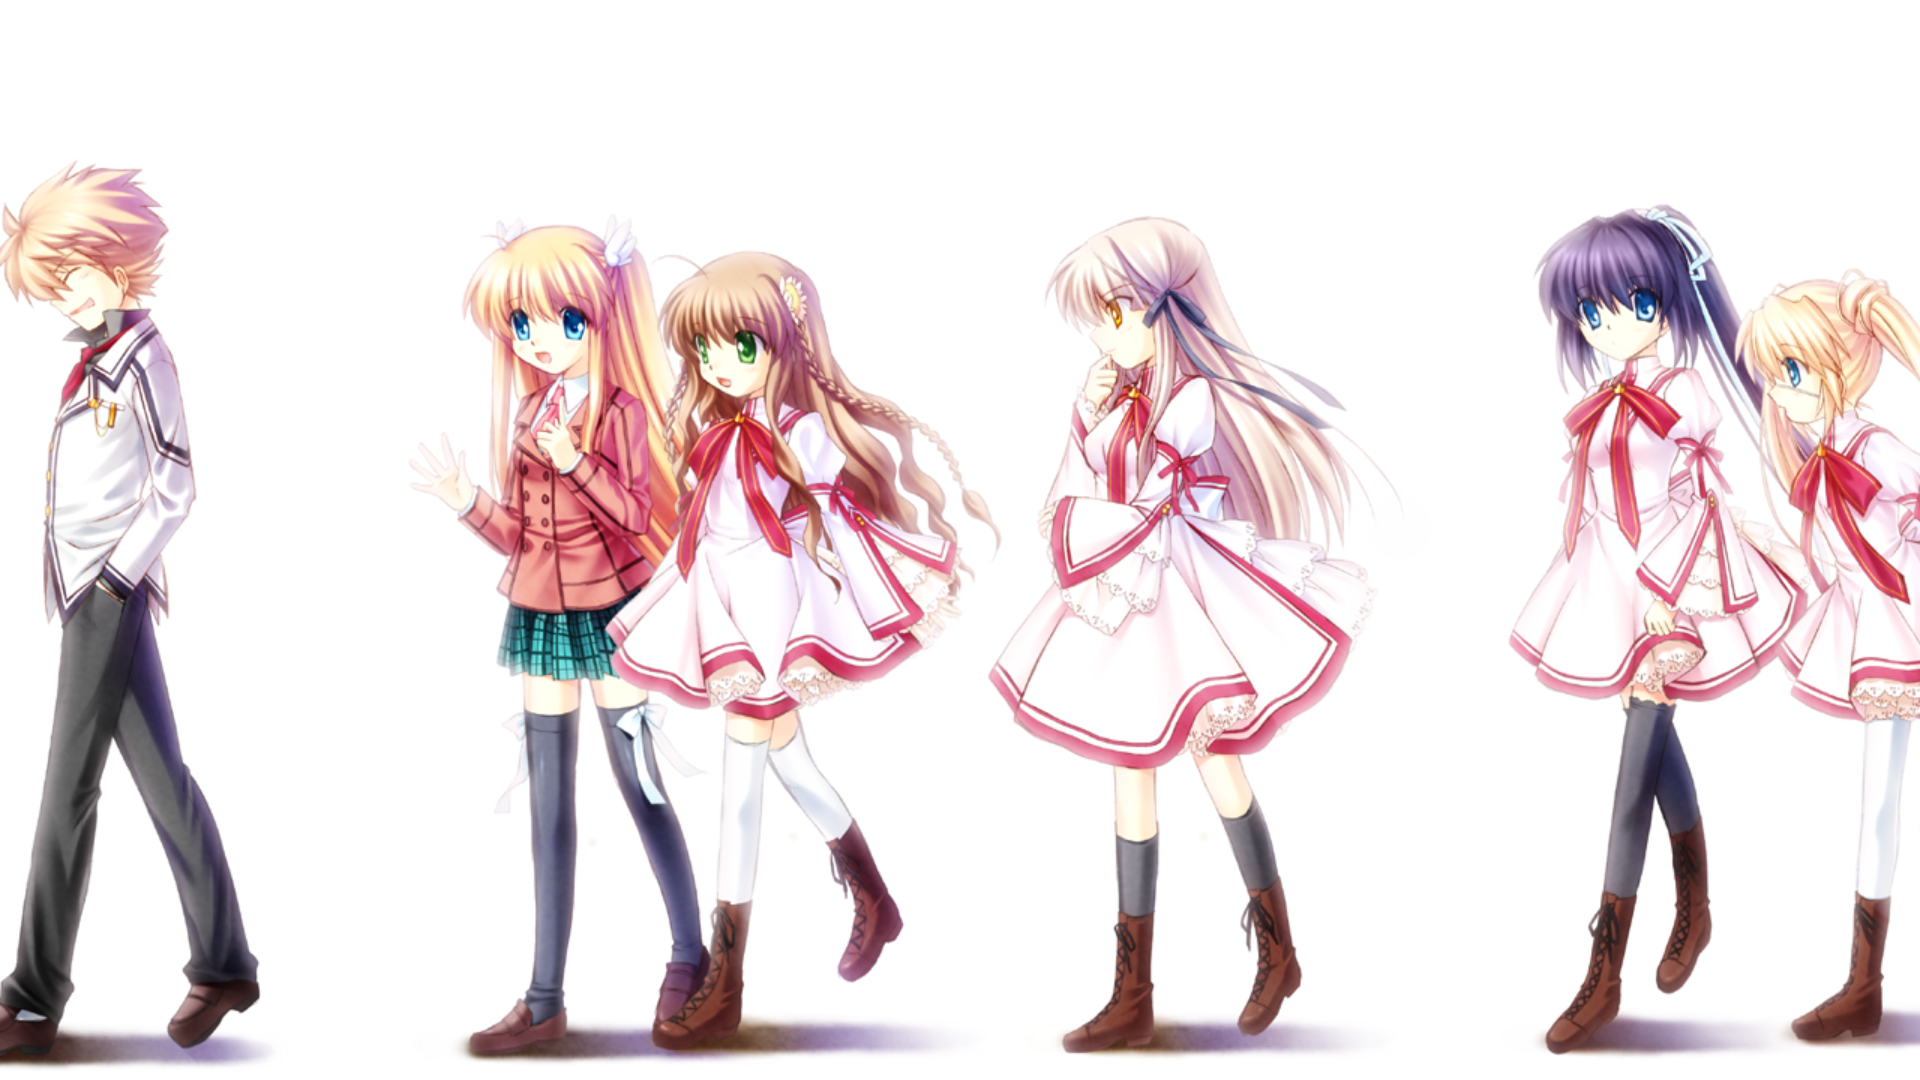 Rewrite Wallpapers Anime Hq Rewrite Pictures 4k Wallpapers 19